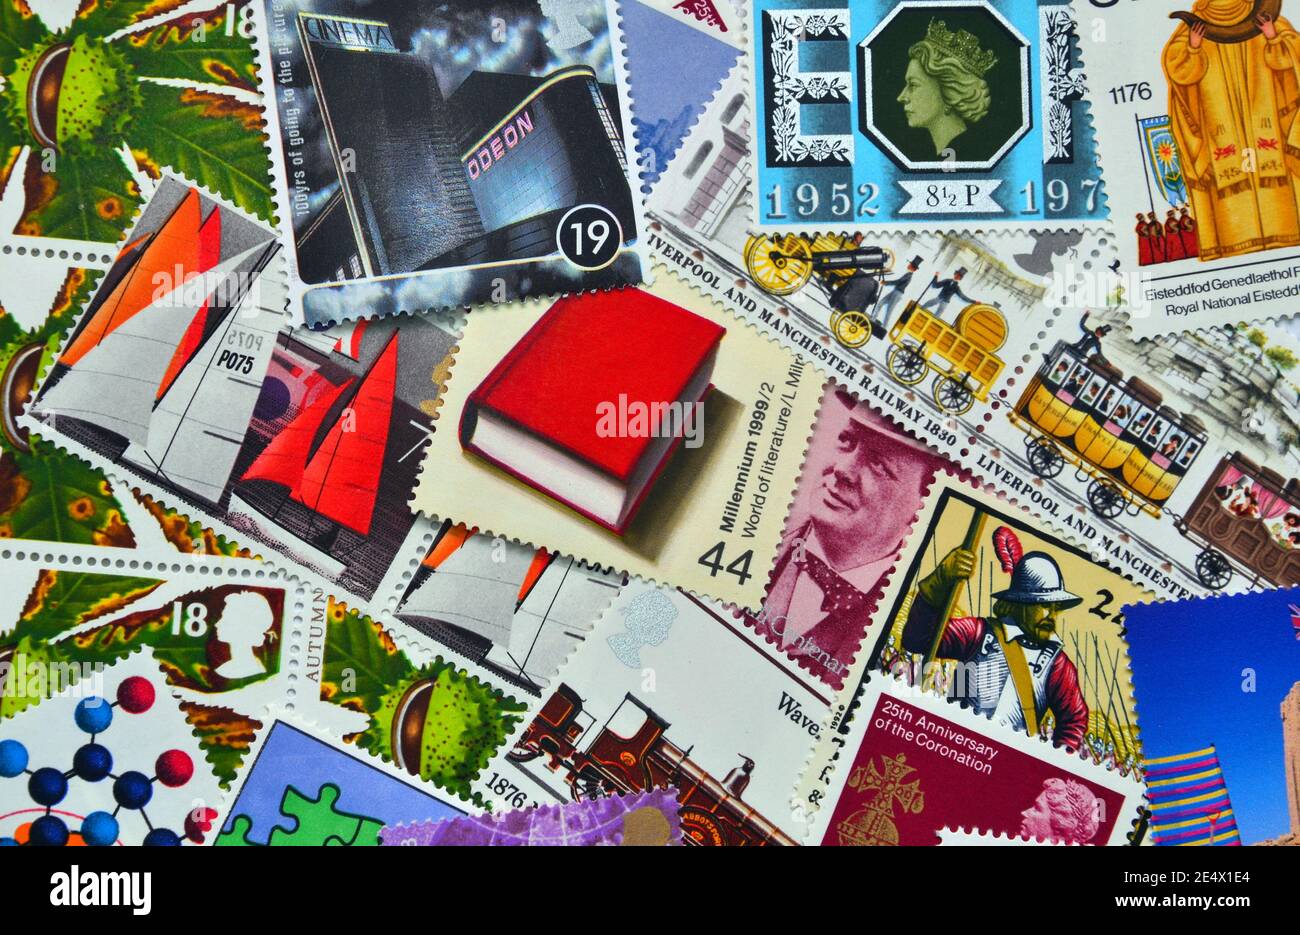 A jumbled mixture of past British commemorative postage stamps which people may collect or use to send letters and parcels through the Royal Mail Stock Photo